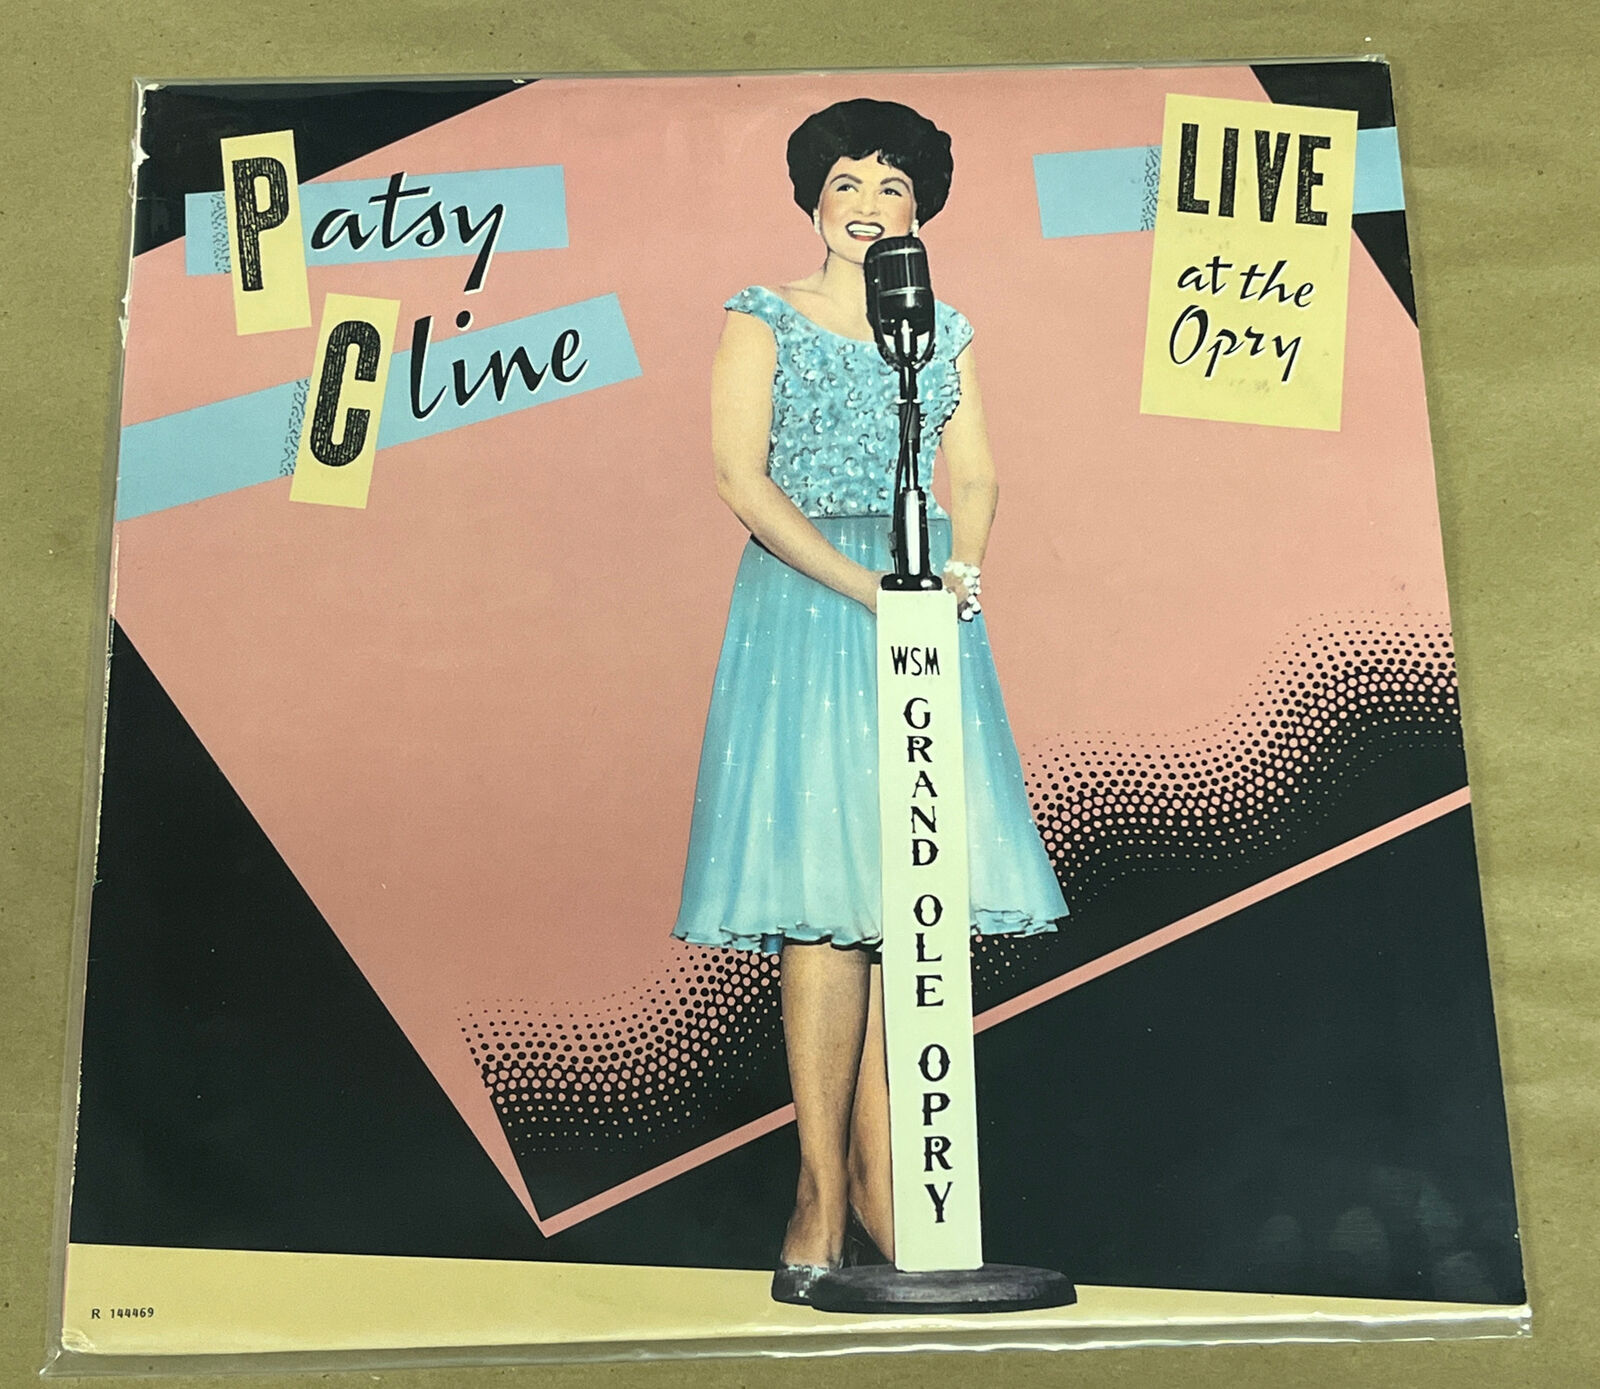 PATSY CLINE - Live At The Opry Vinyl Record (1988, MCA Records)